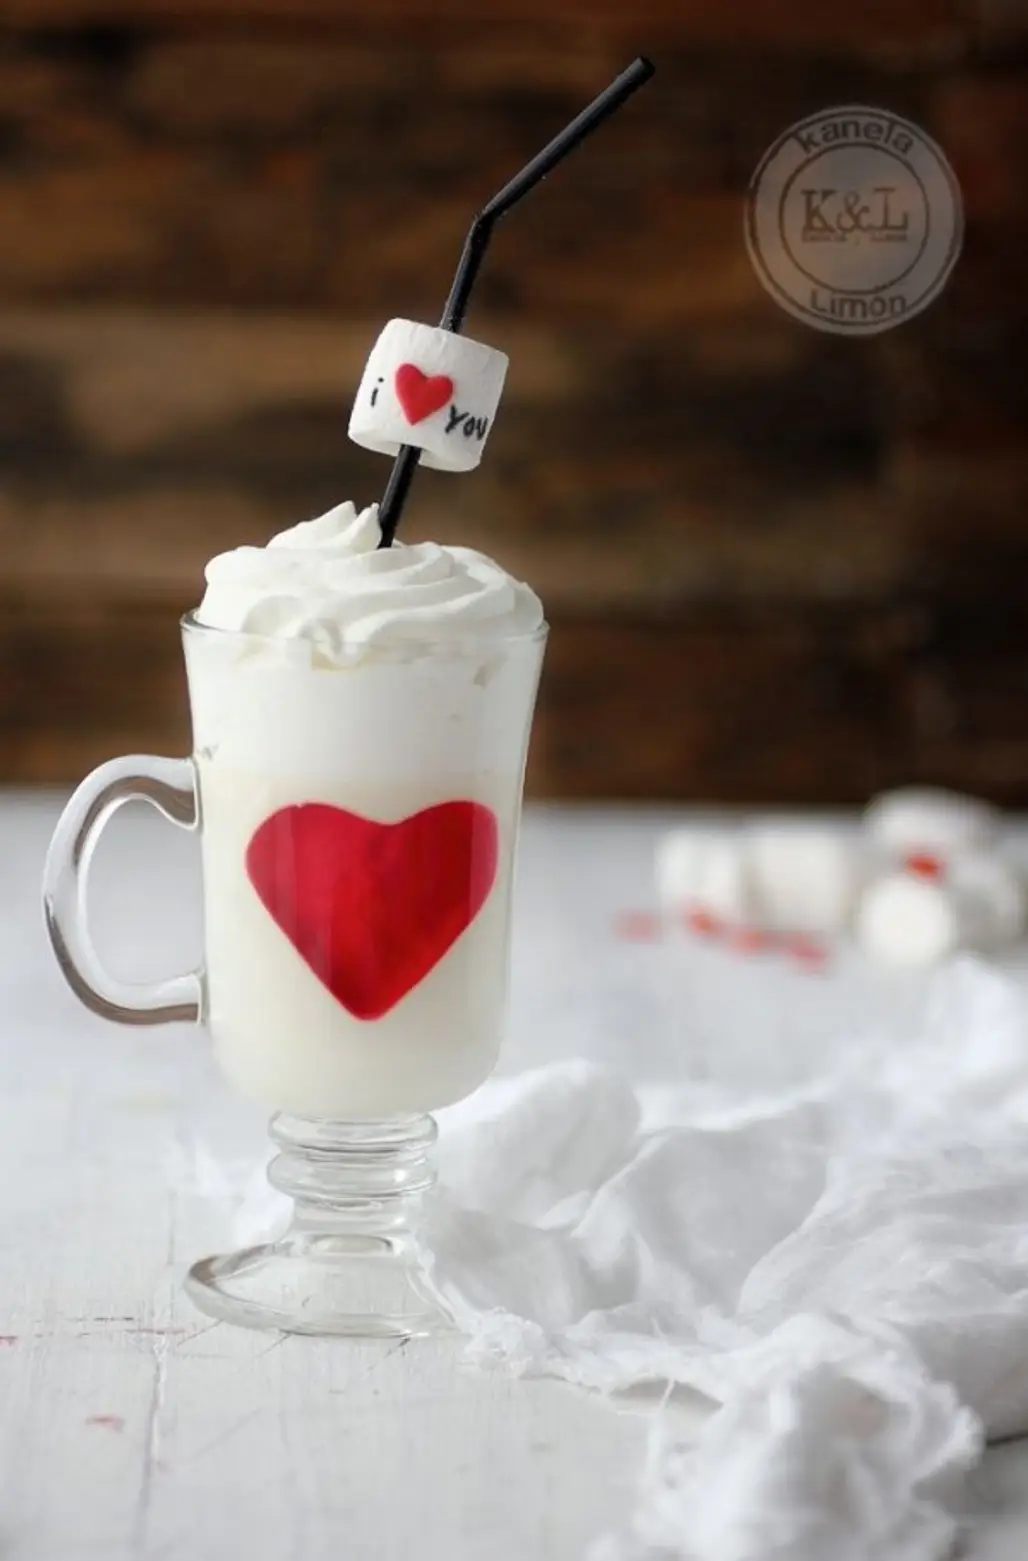 White Chocolate Panna Cotta with Jell-o Hearts